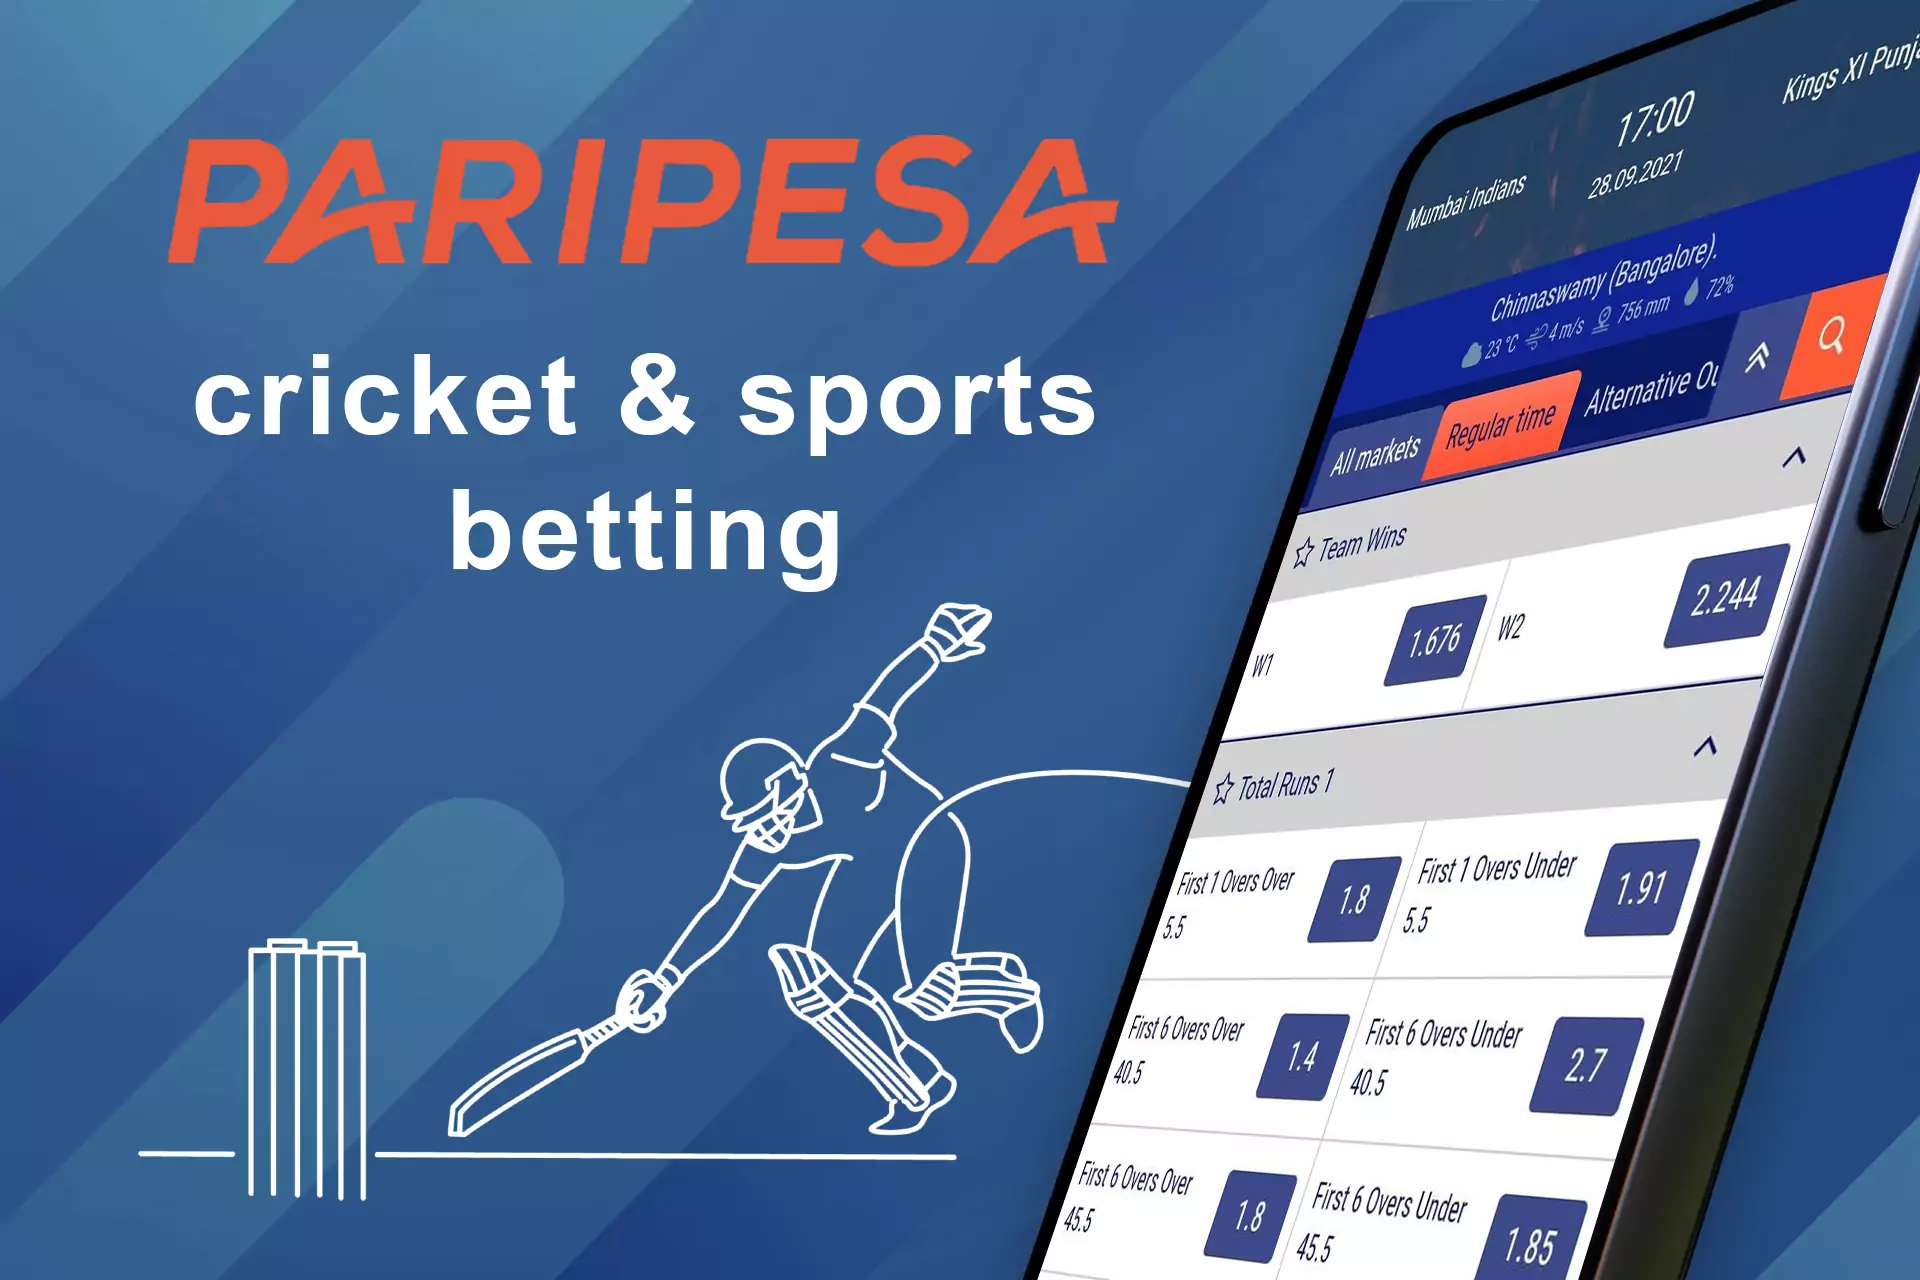 In the PariPesa app, you can place bets on cricket and other sports events.